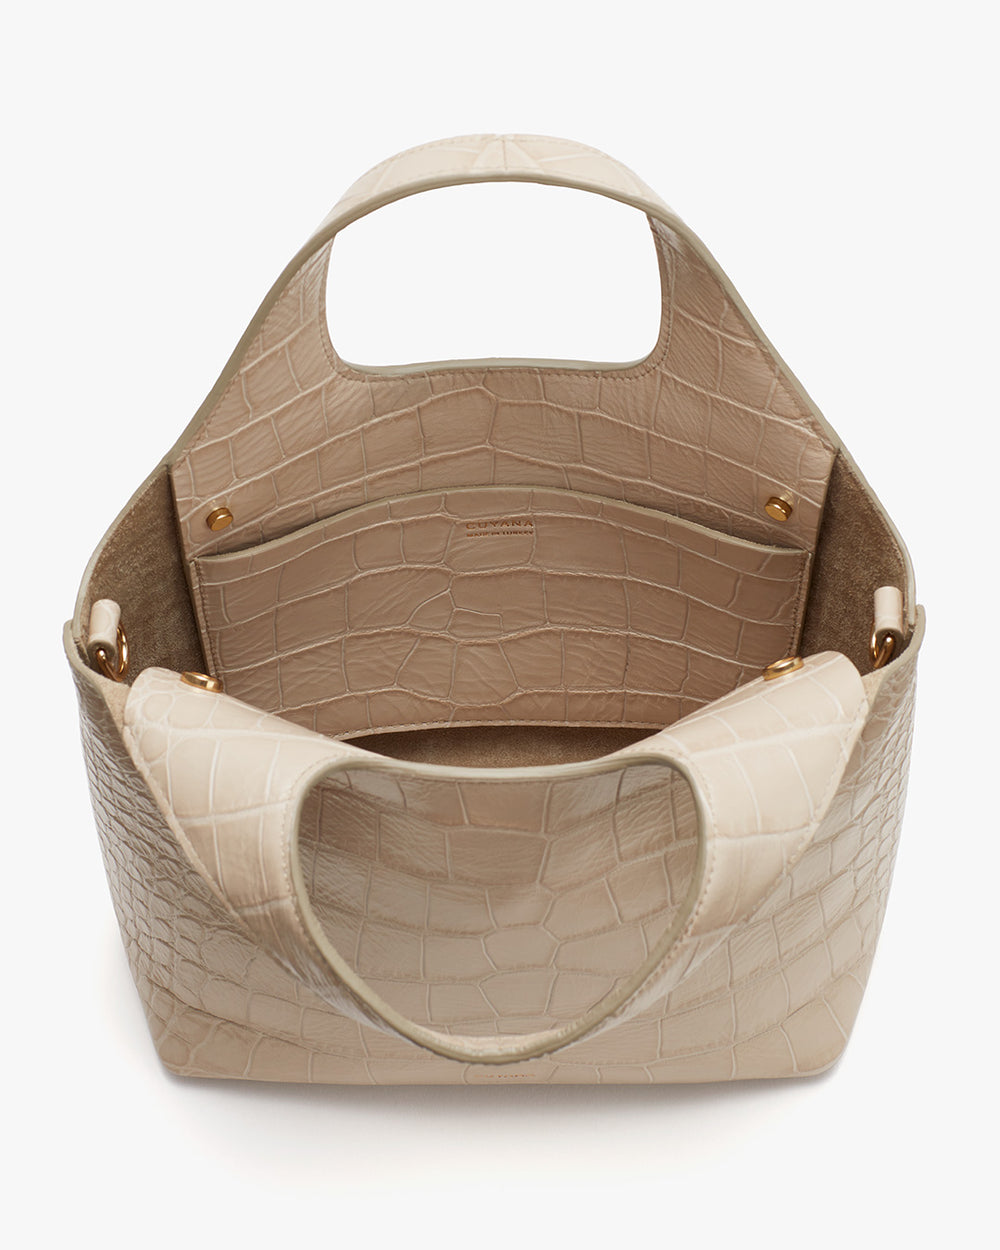 Open top handbag with textured surface and rounded handles.